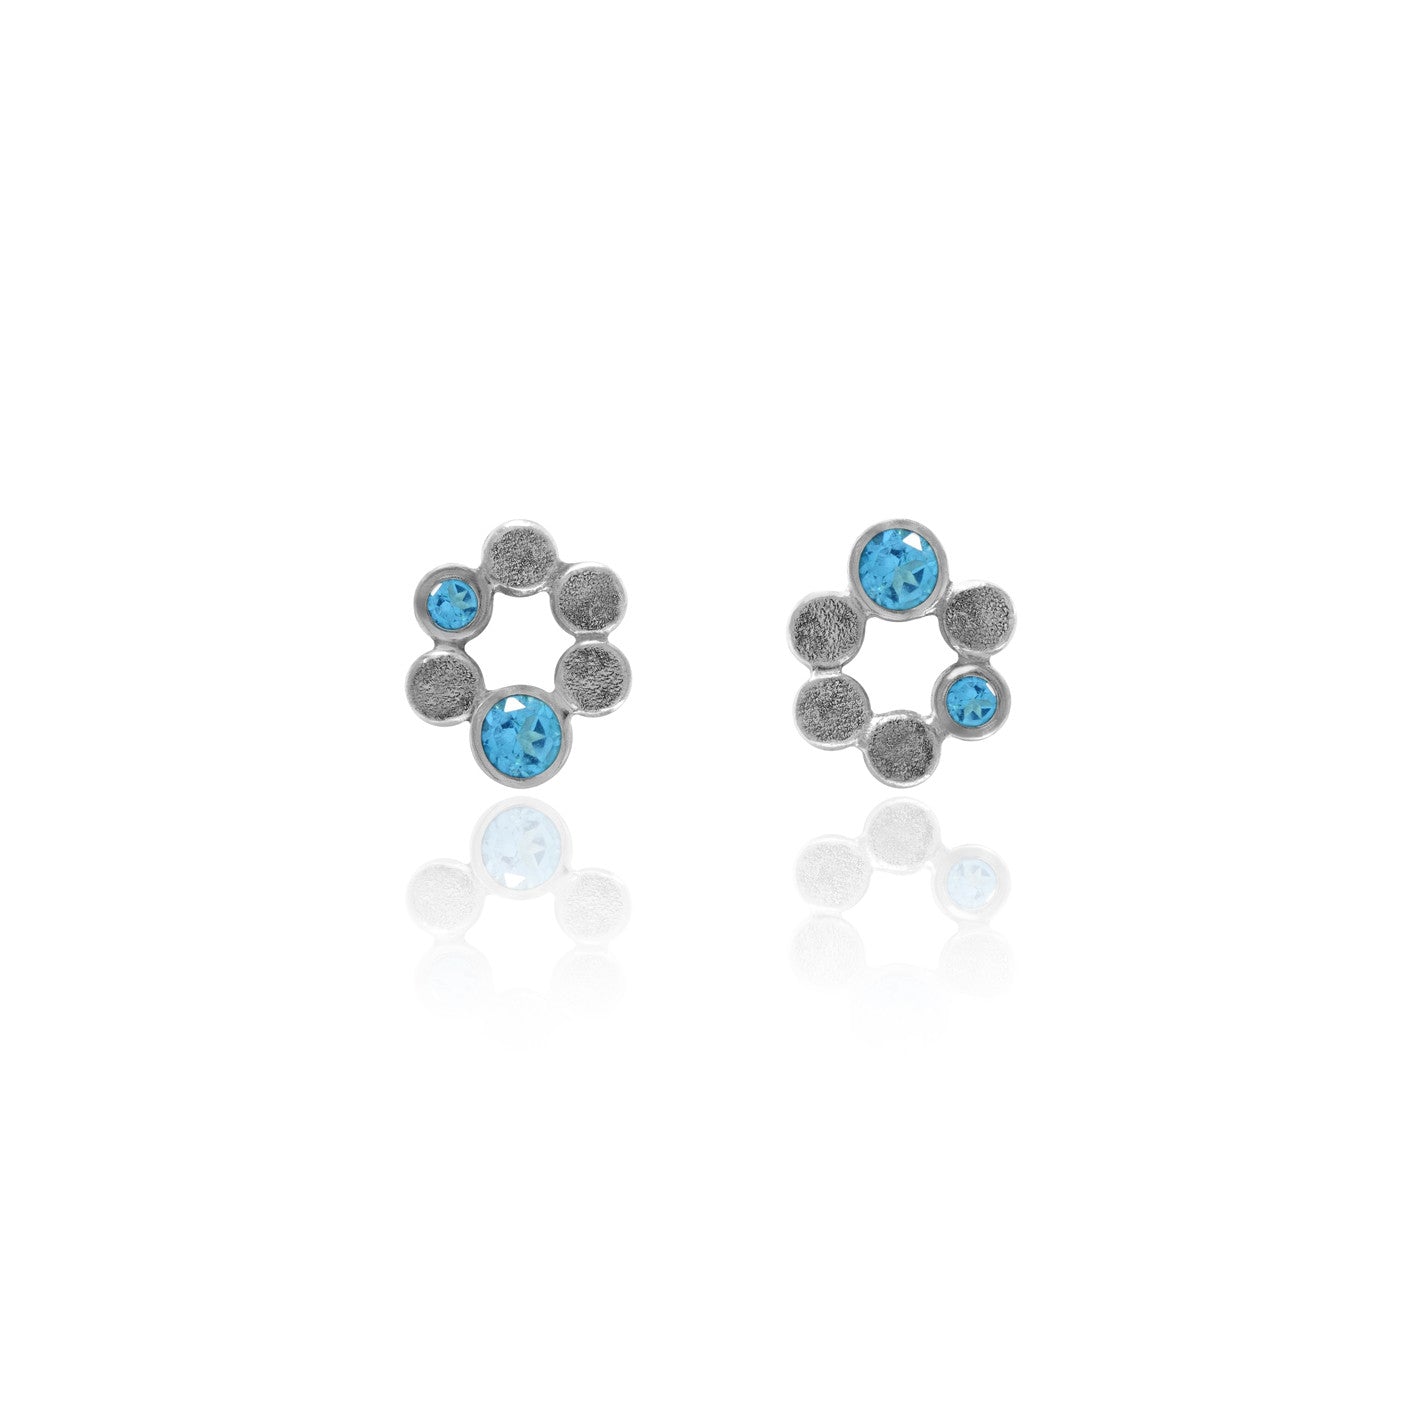 Small halo earrings in sterling silver and blue topaz - ready to wear